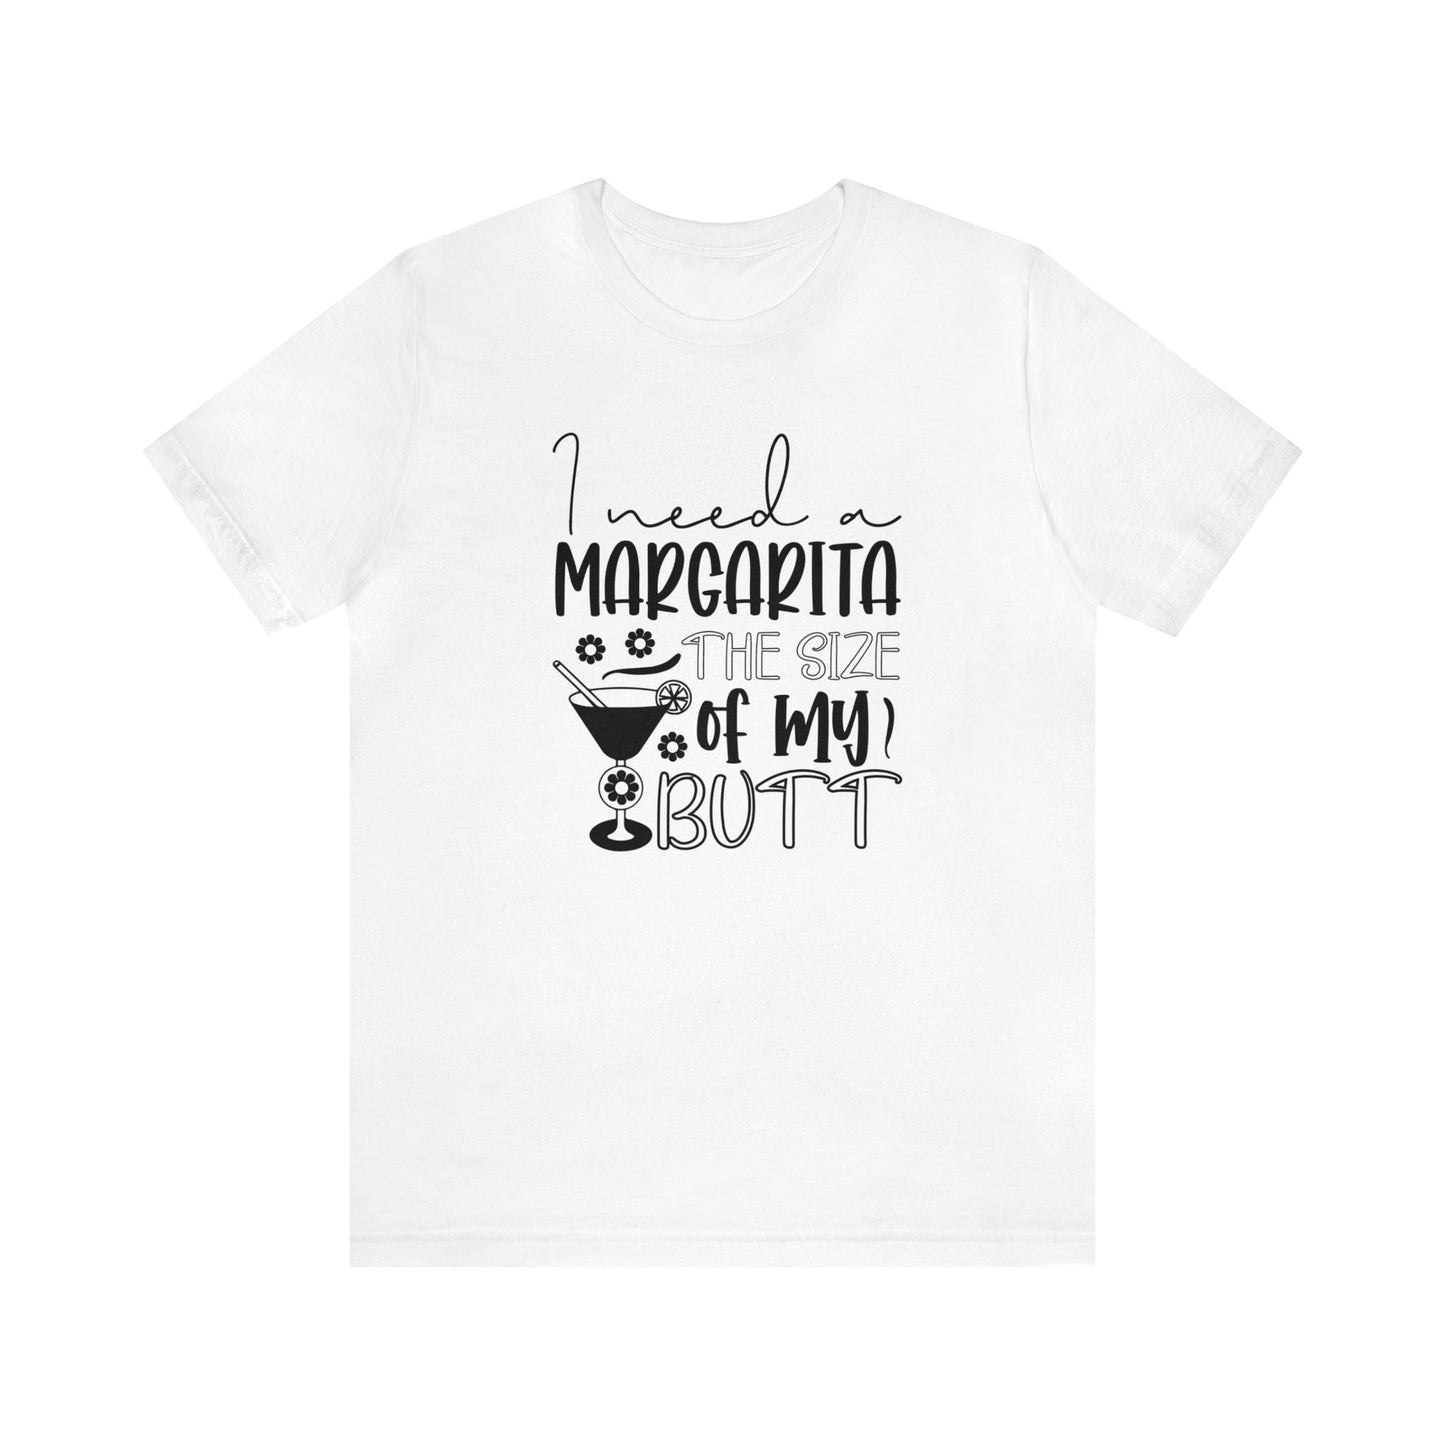 I need a Margarita the size of my Butt - Jersey Short Sleeve T-Shirt